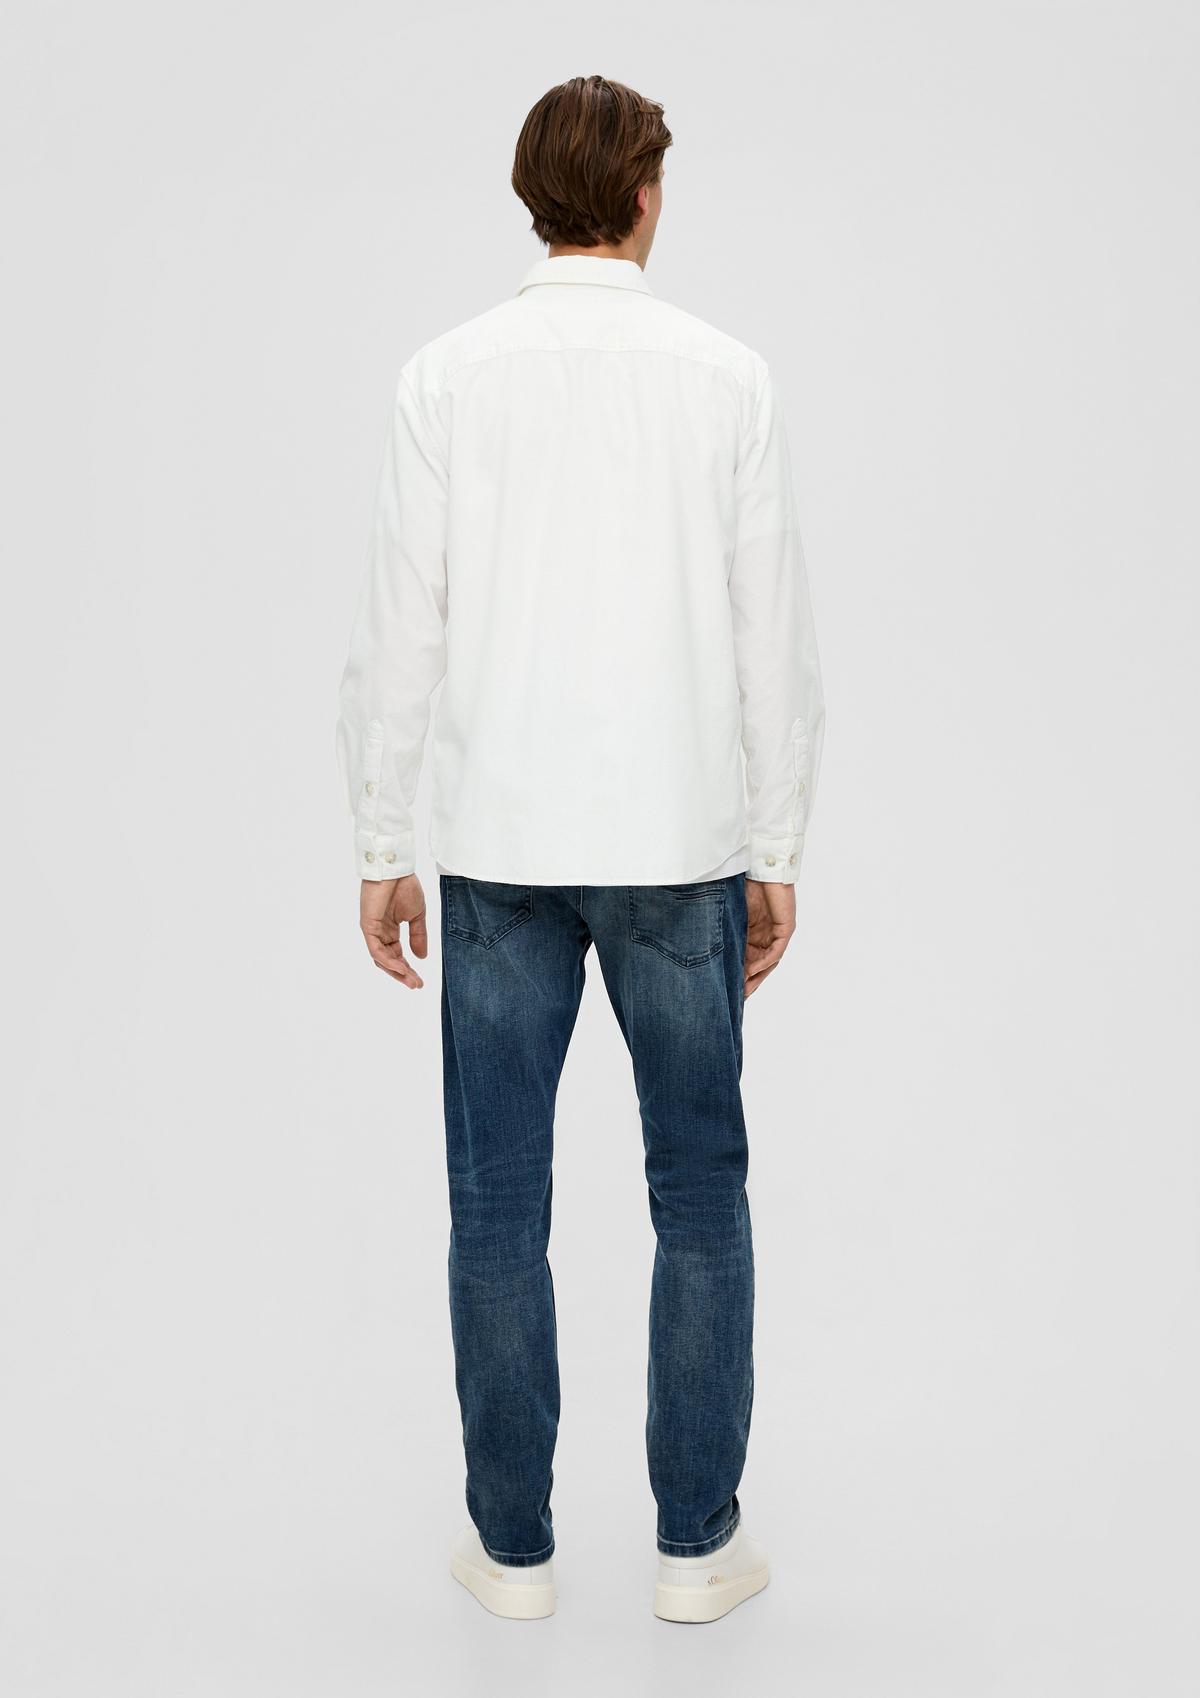 Regular fit: long sleeve shirt made of cotton - white